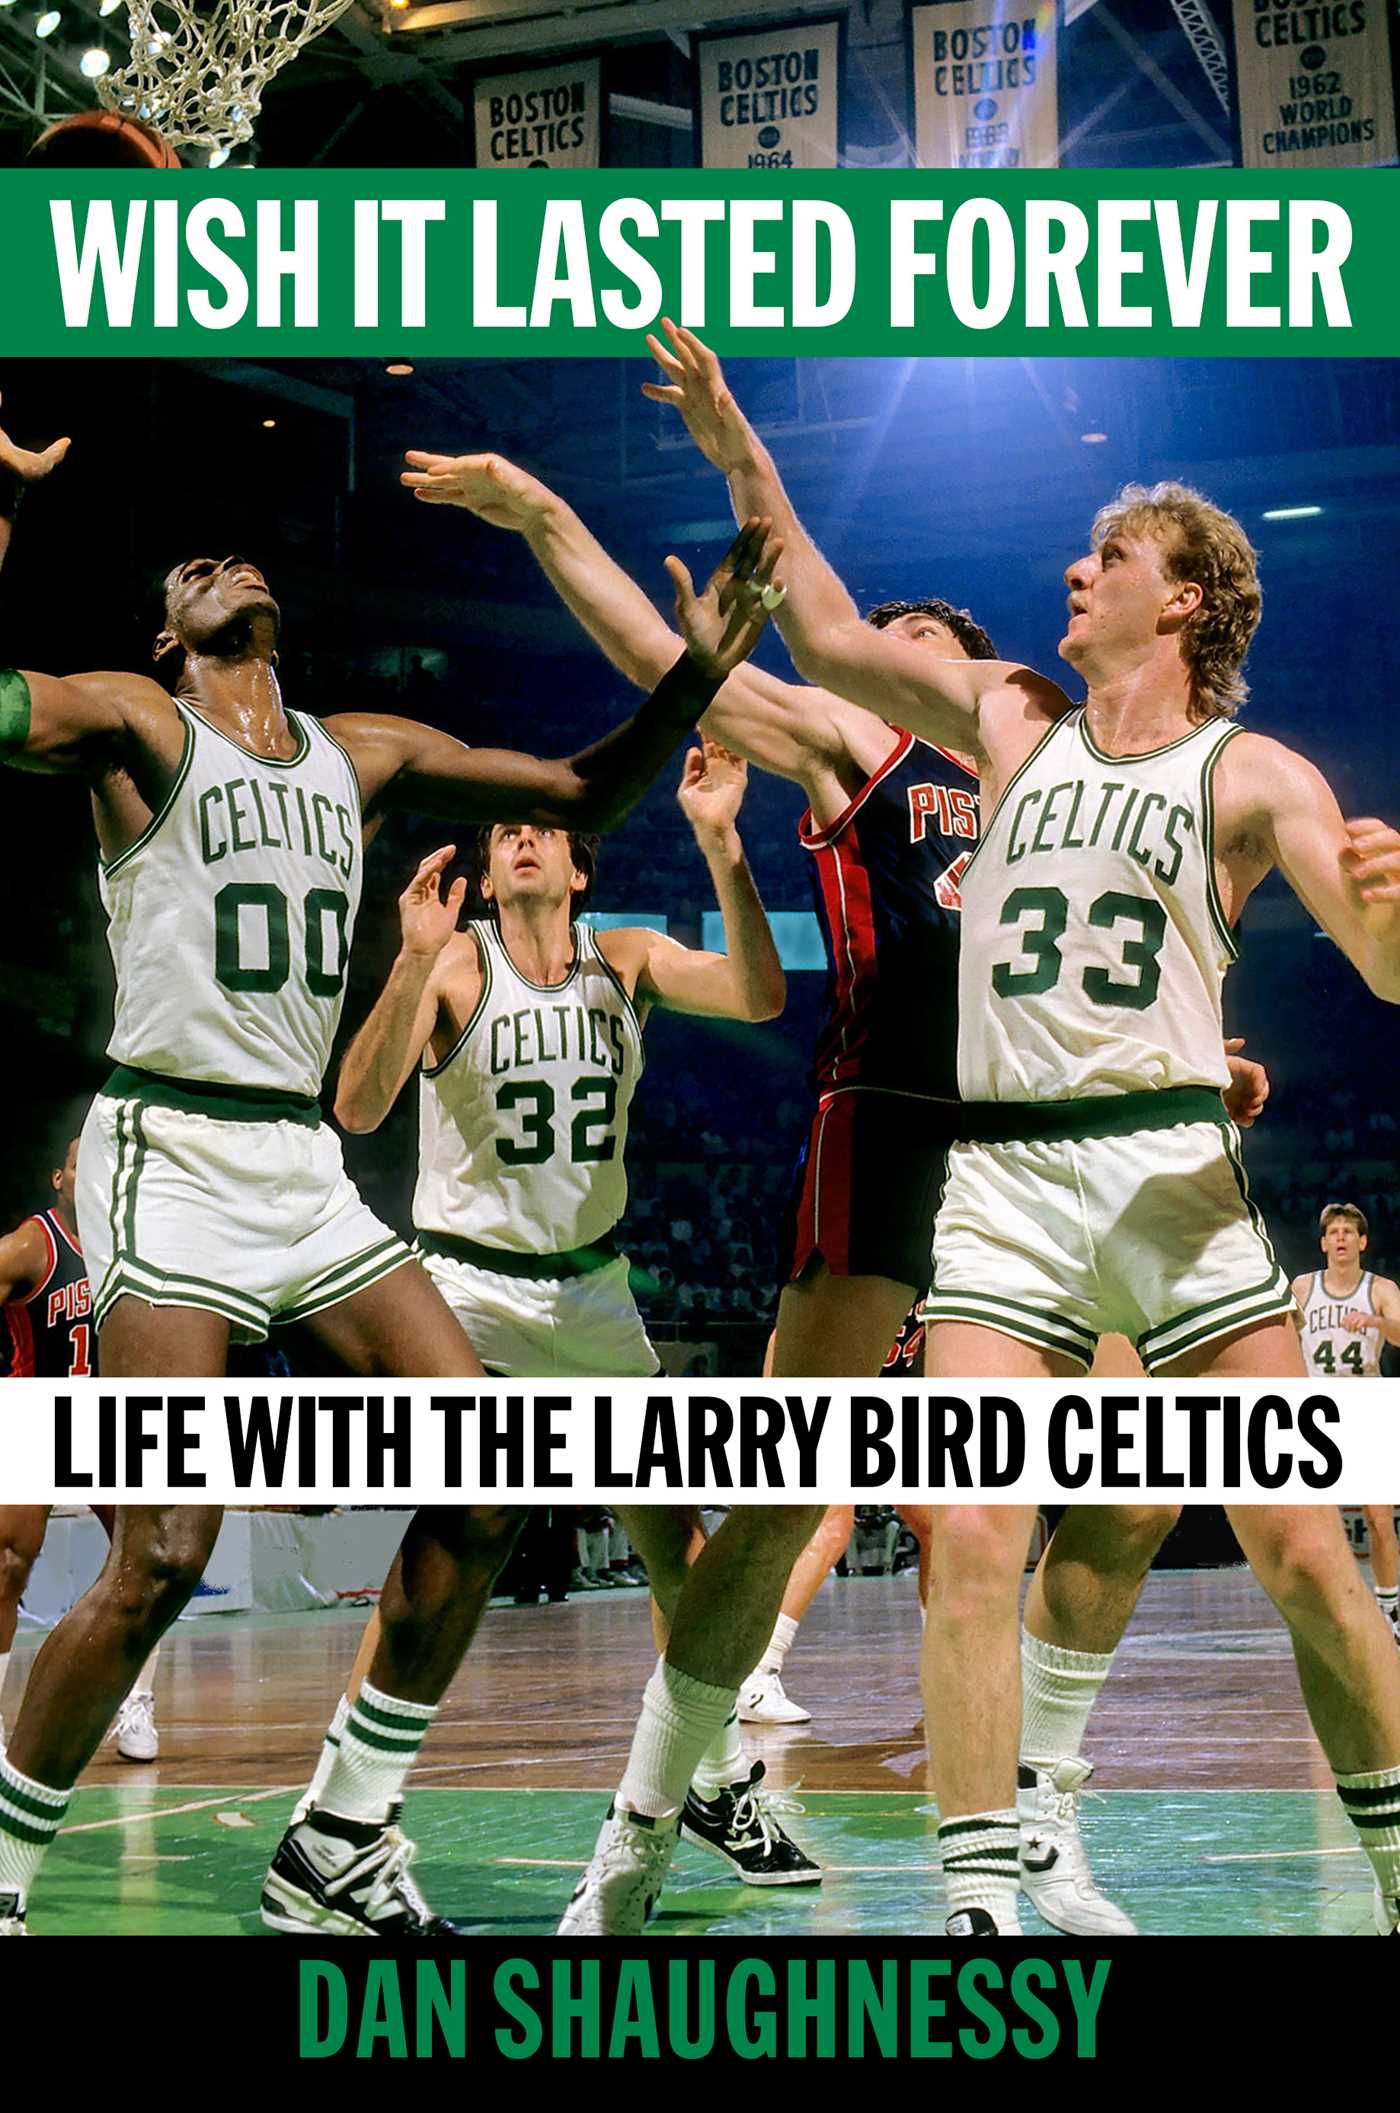 Winning Time: What Happened Between Magic Johnson and Larry Bird in Boston  Garden Game?